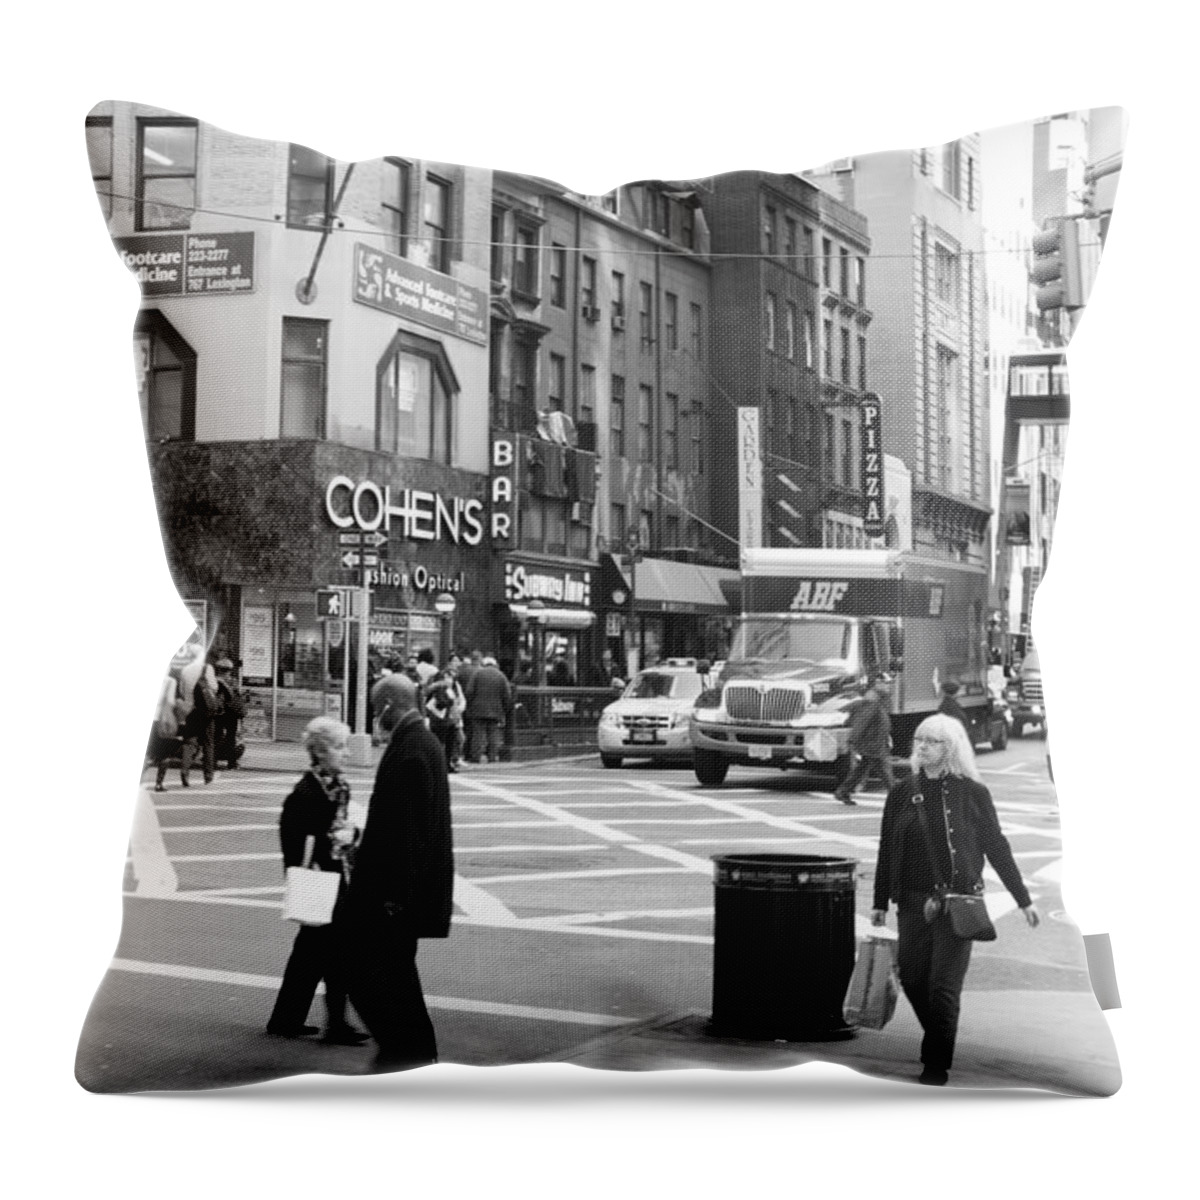  Throw Pillow featuring the photograph 2012 by Hyung Chang Kim